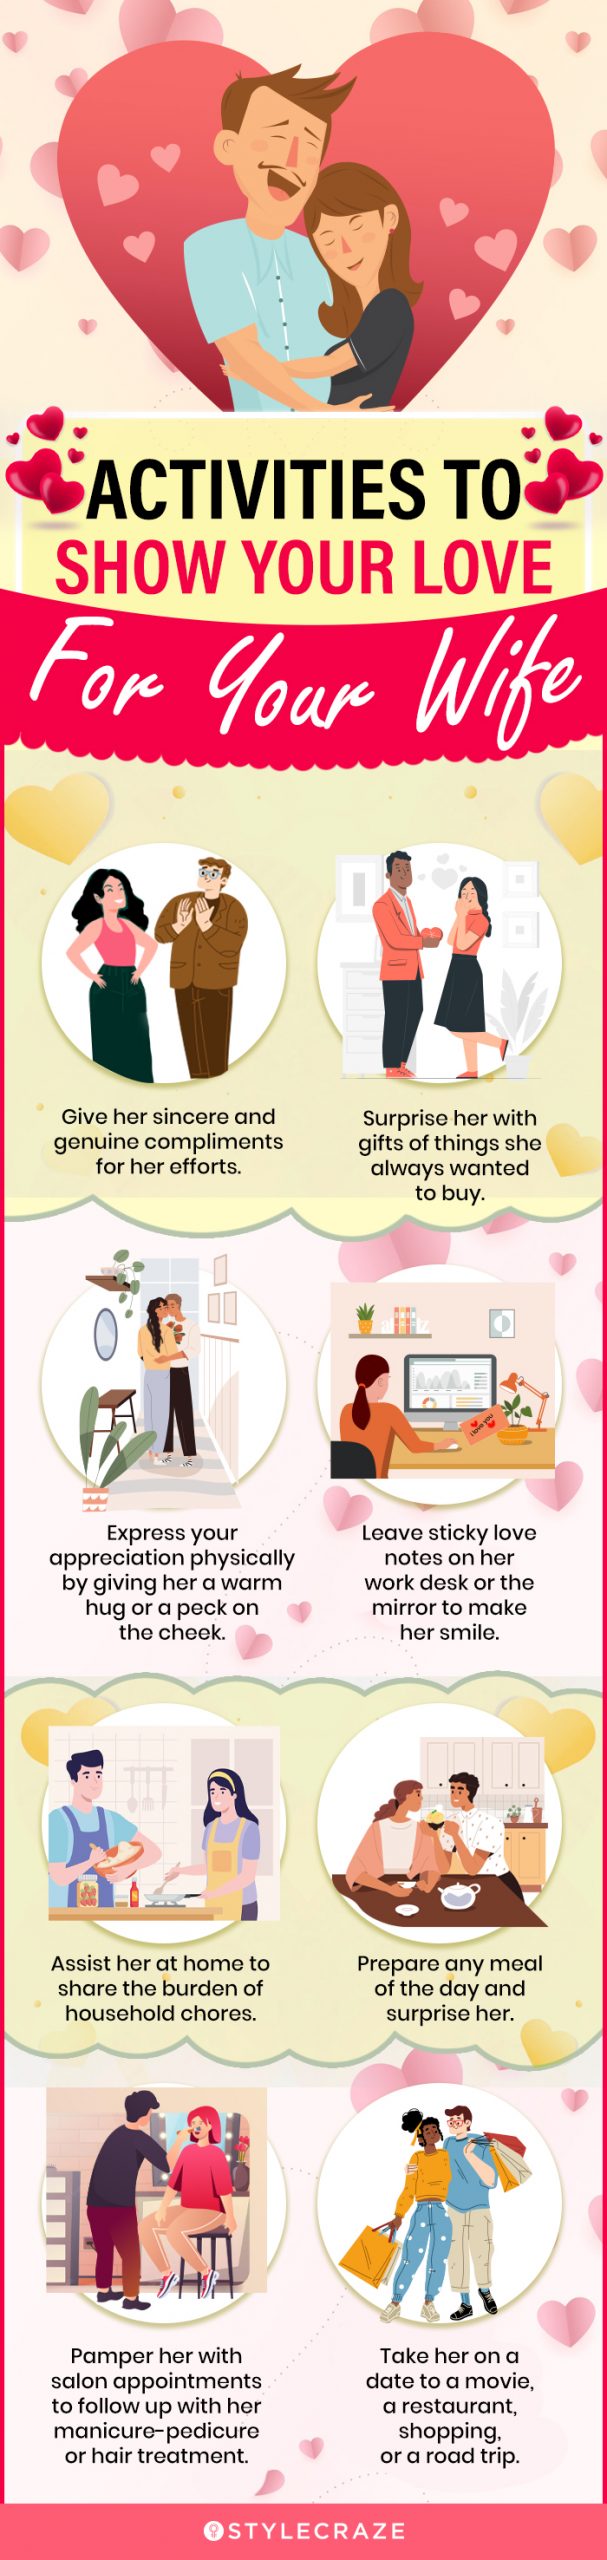 activities to show your love for your wife [infographic]